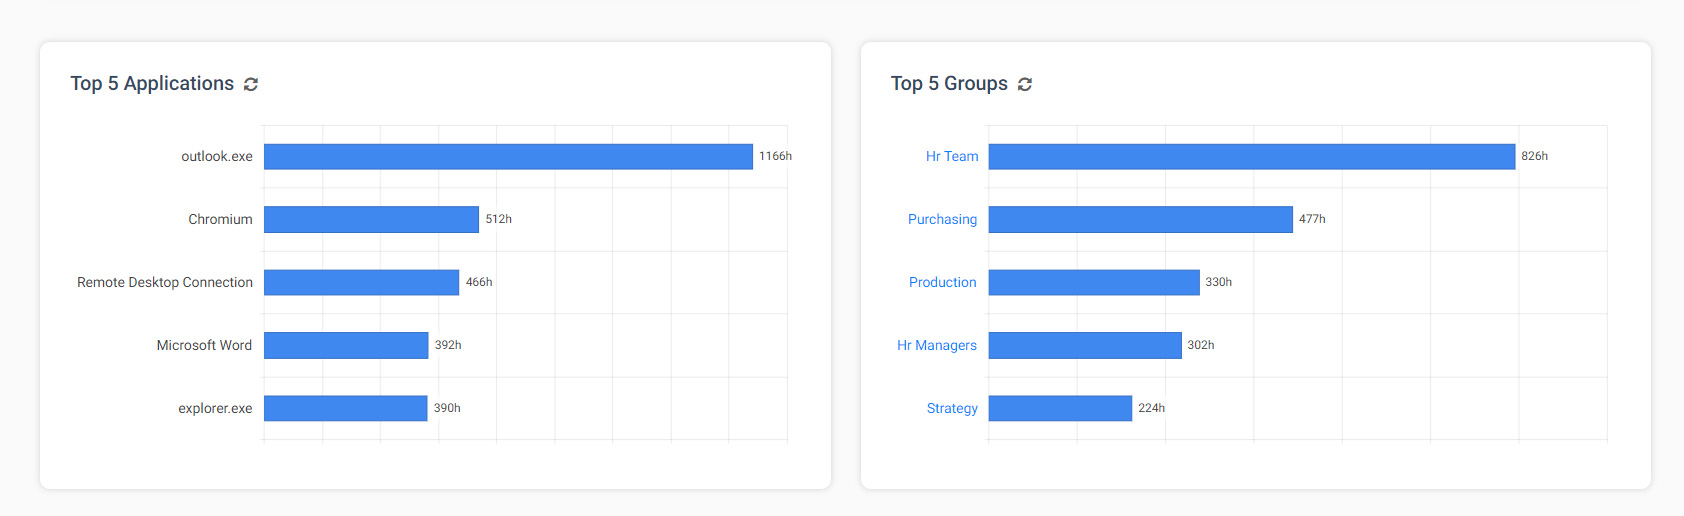 two bar charts: top 5 applications and top 5 groups